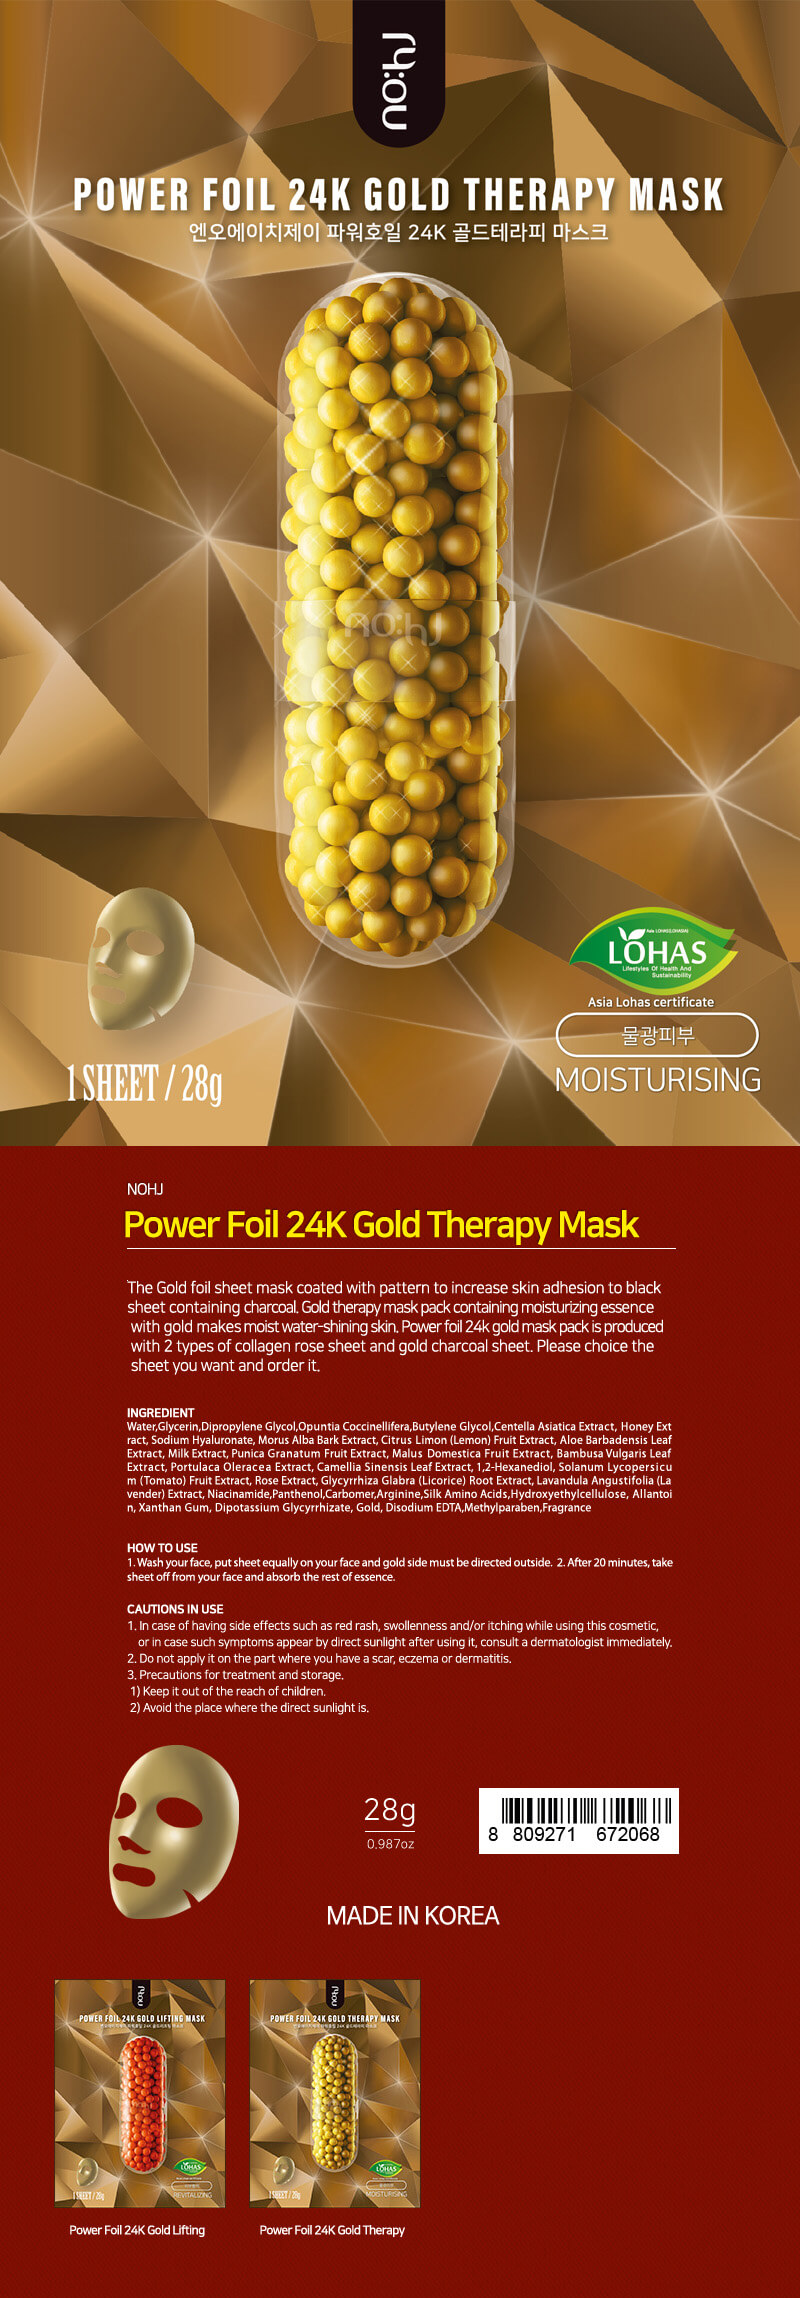 NOHj  ,NOHj Power Foil 24K Gold Therapy Mask,NOHj Power Foil 24K Gold Therapy Mask รีวิว,NOHj Power Foil 24K Gold Therapy Mask ราคา,มาส์ก nohj,